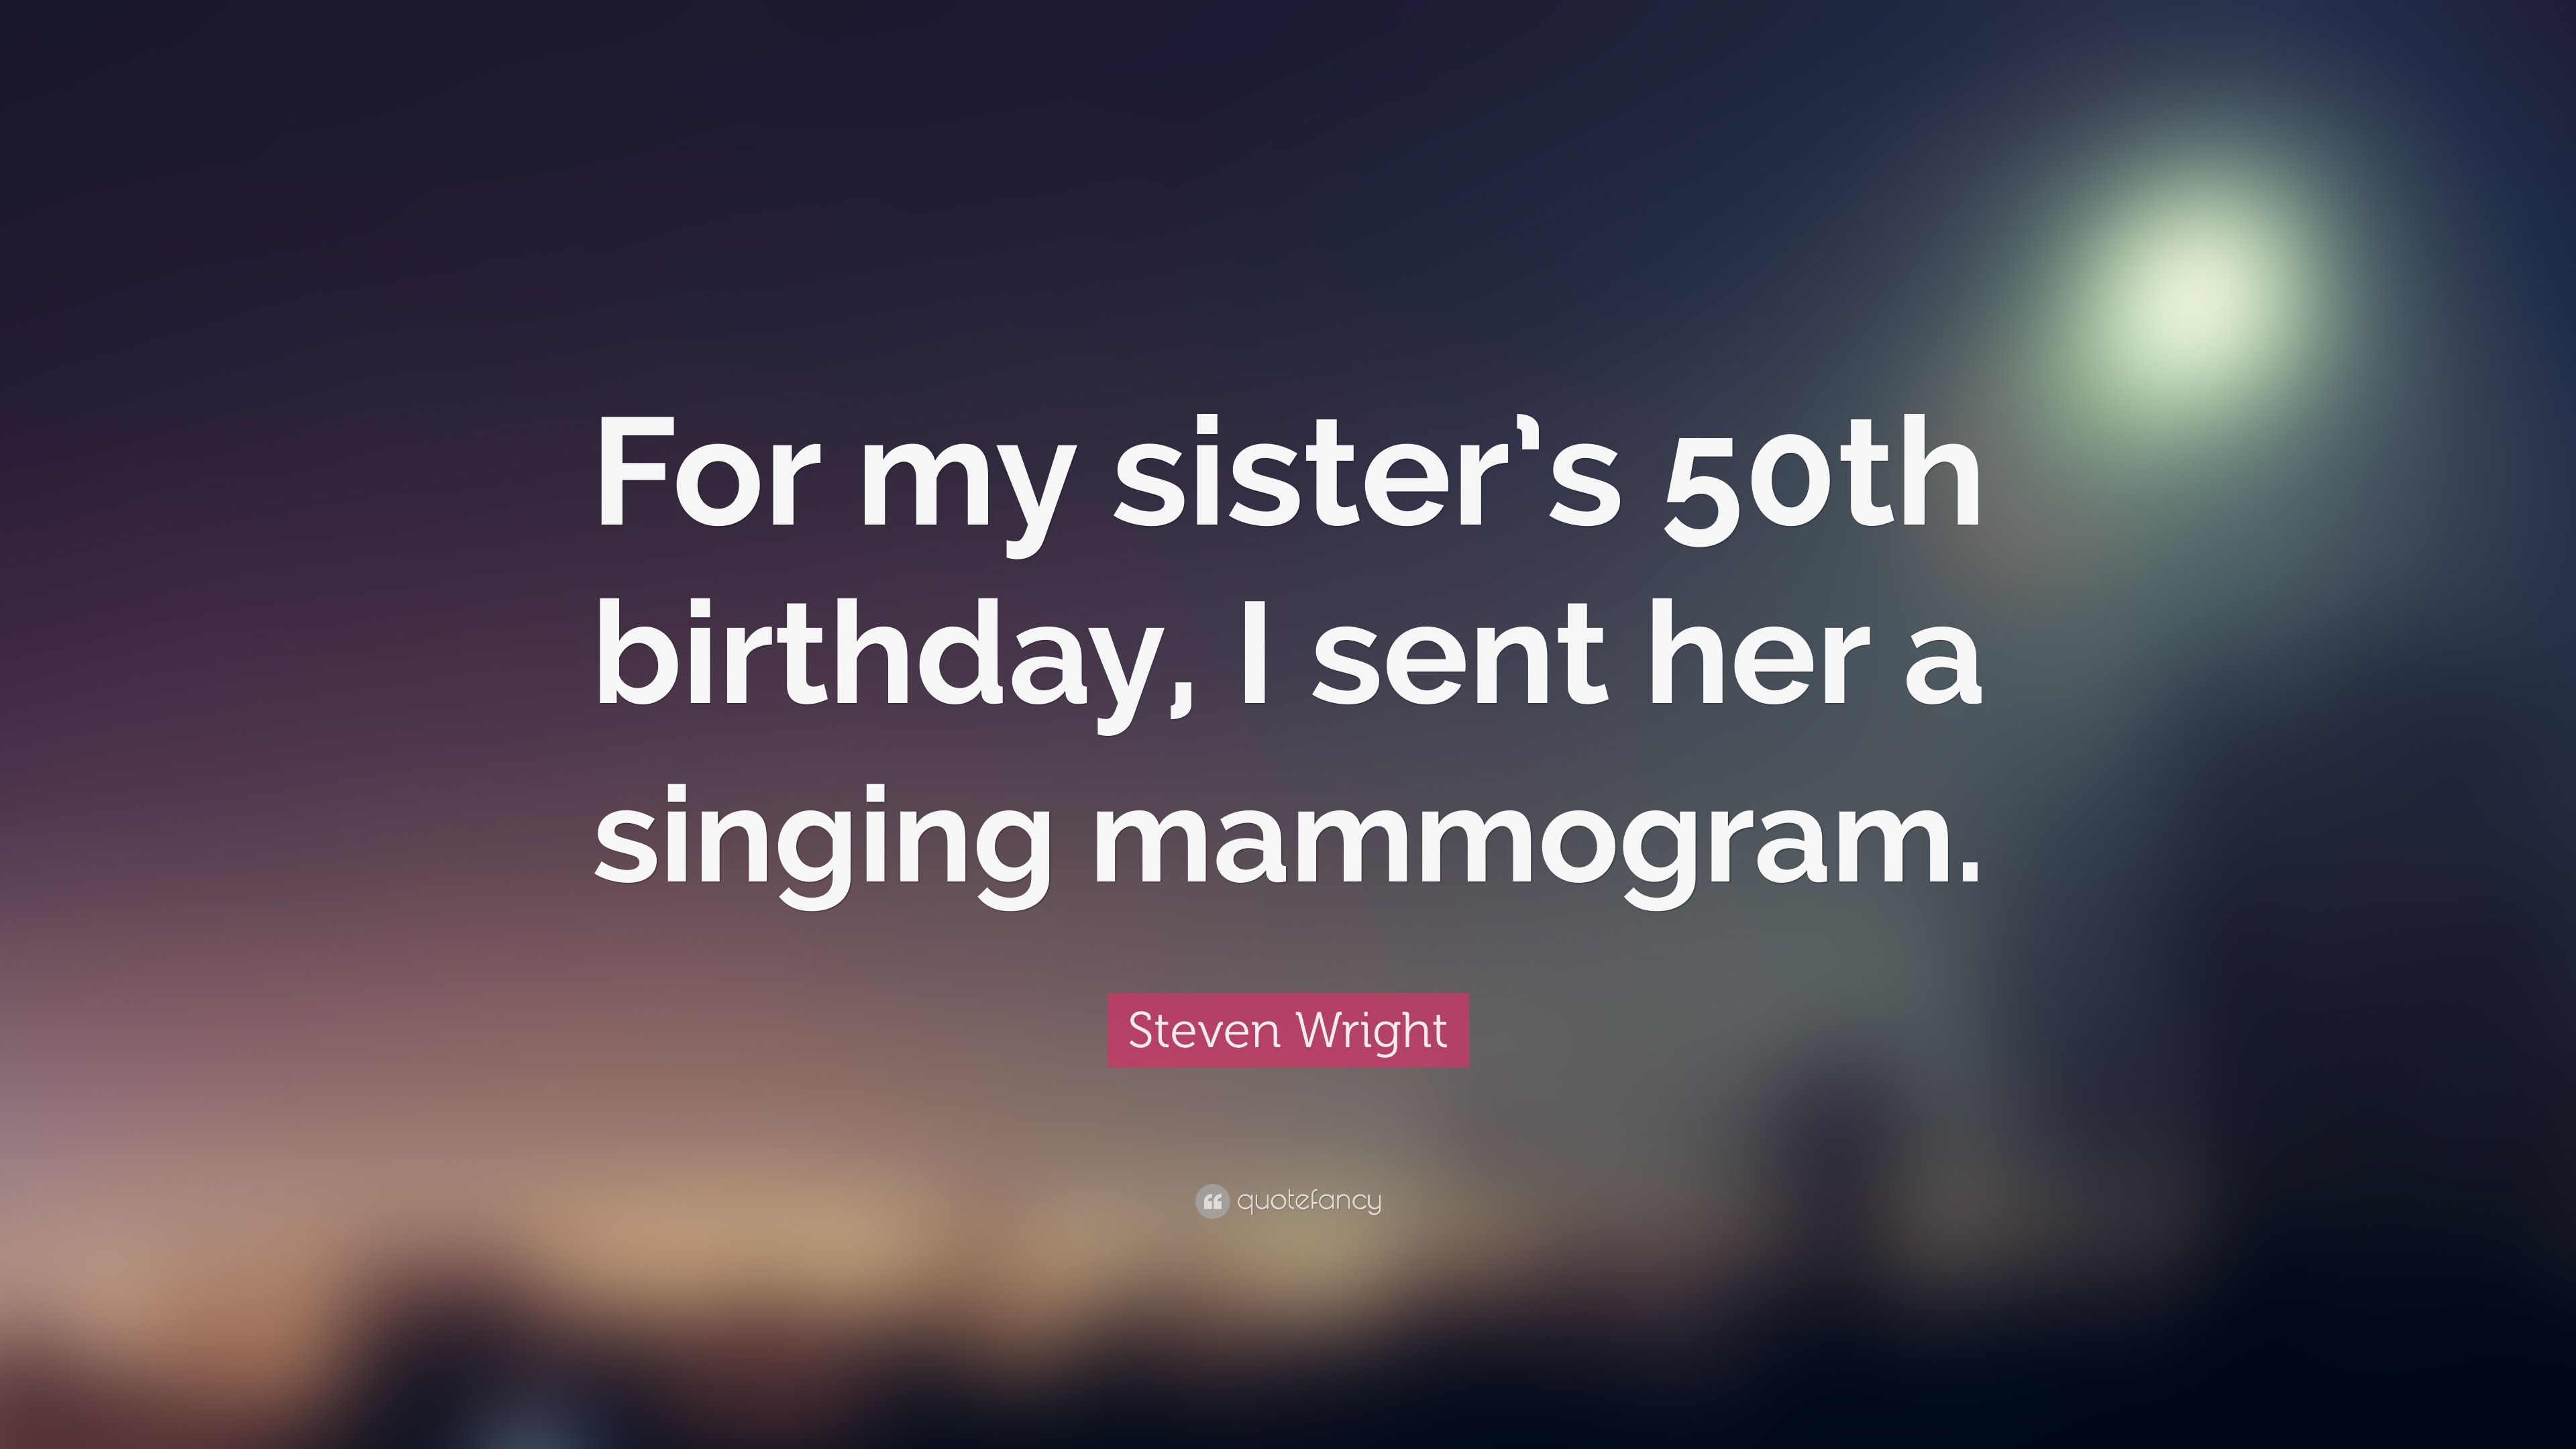 Steven Wright Quote: “For my sister's 50th birthday, I sent her a singing mammogram.” (10 wallpaper)